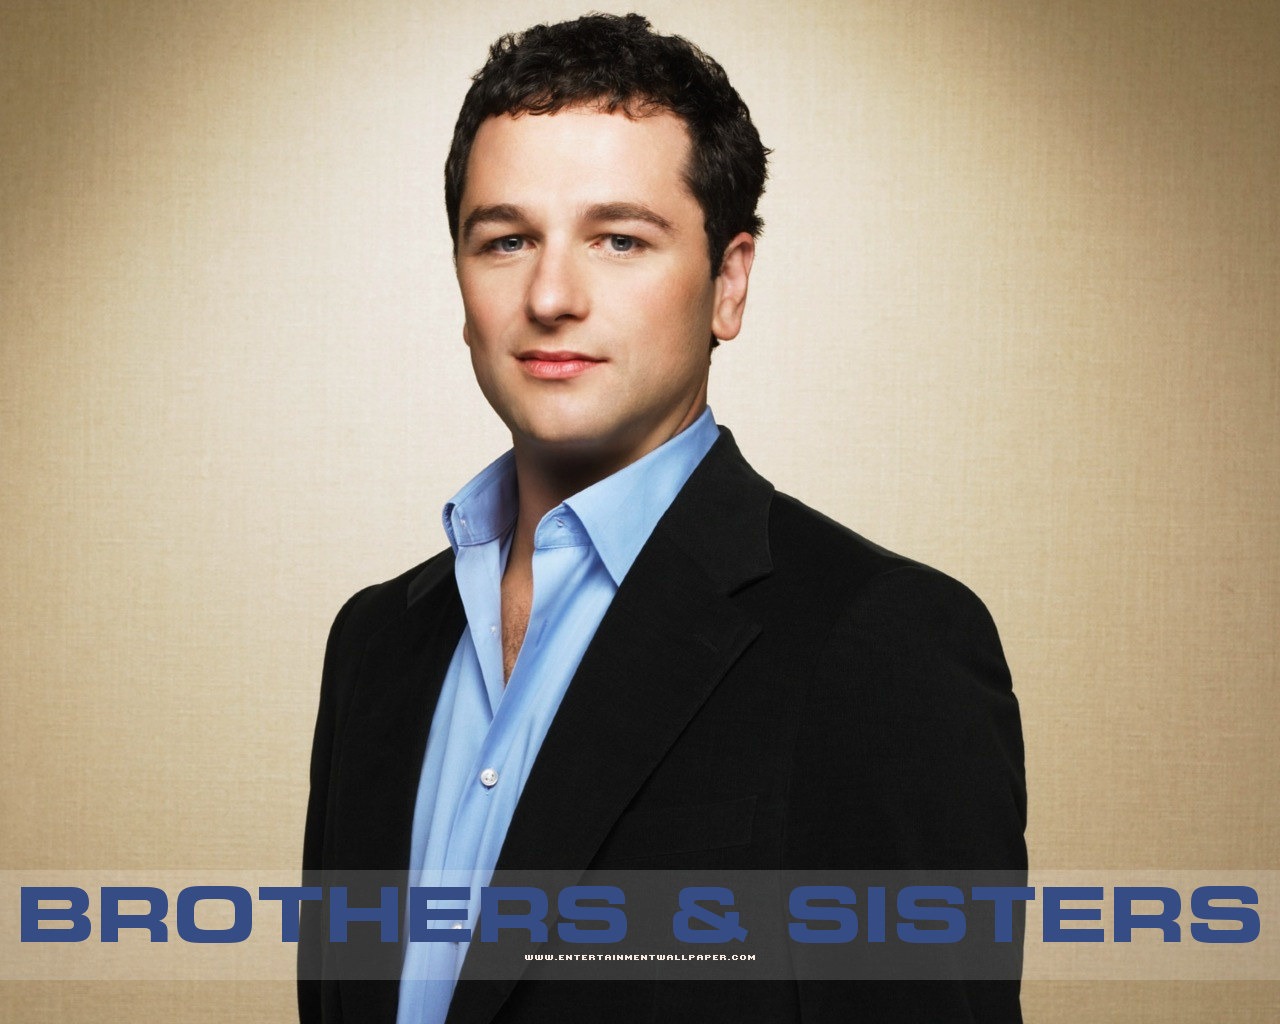 Brothers and Sisters wallpaper #26 - 1280x1024